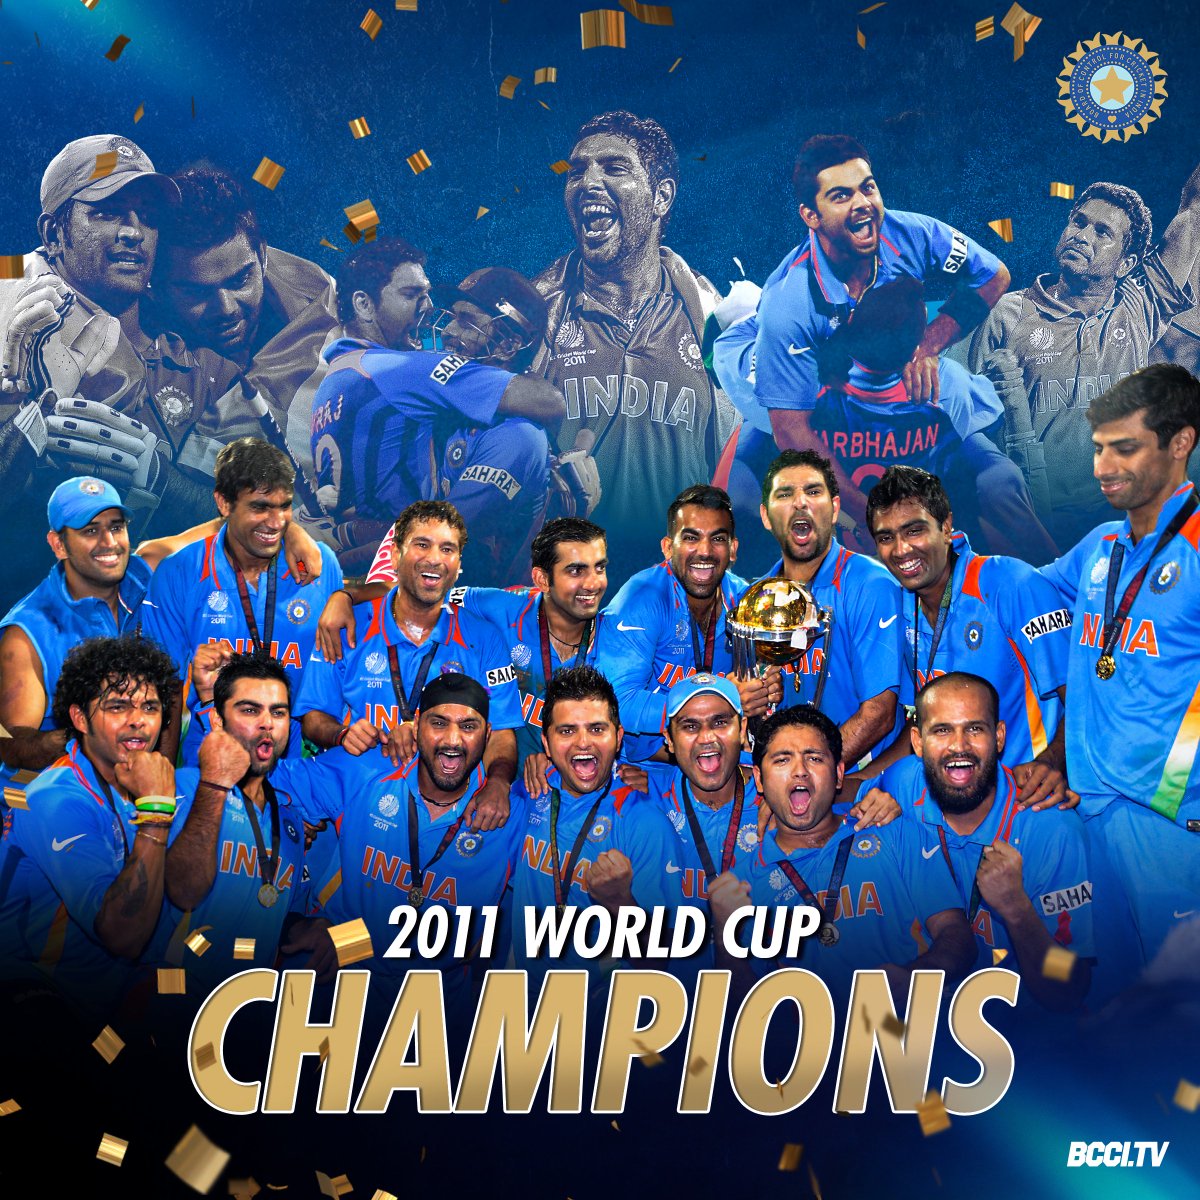 𝘼𝙨 𝙨𝙥𝙚𝙘𝙞𝙖𝙡 𝙖𝙨 𝙖 𝙩𝙝𝙧𝙤𝙬𝙗𝙖𝙘𝙠 𝙘𝙖𝙣 𝙜𝙚𝙩! 🏆 🗓️ #OnThisDay in 2011, #TeamIndia won the ODI World Cup for the second time. 👏👏